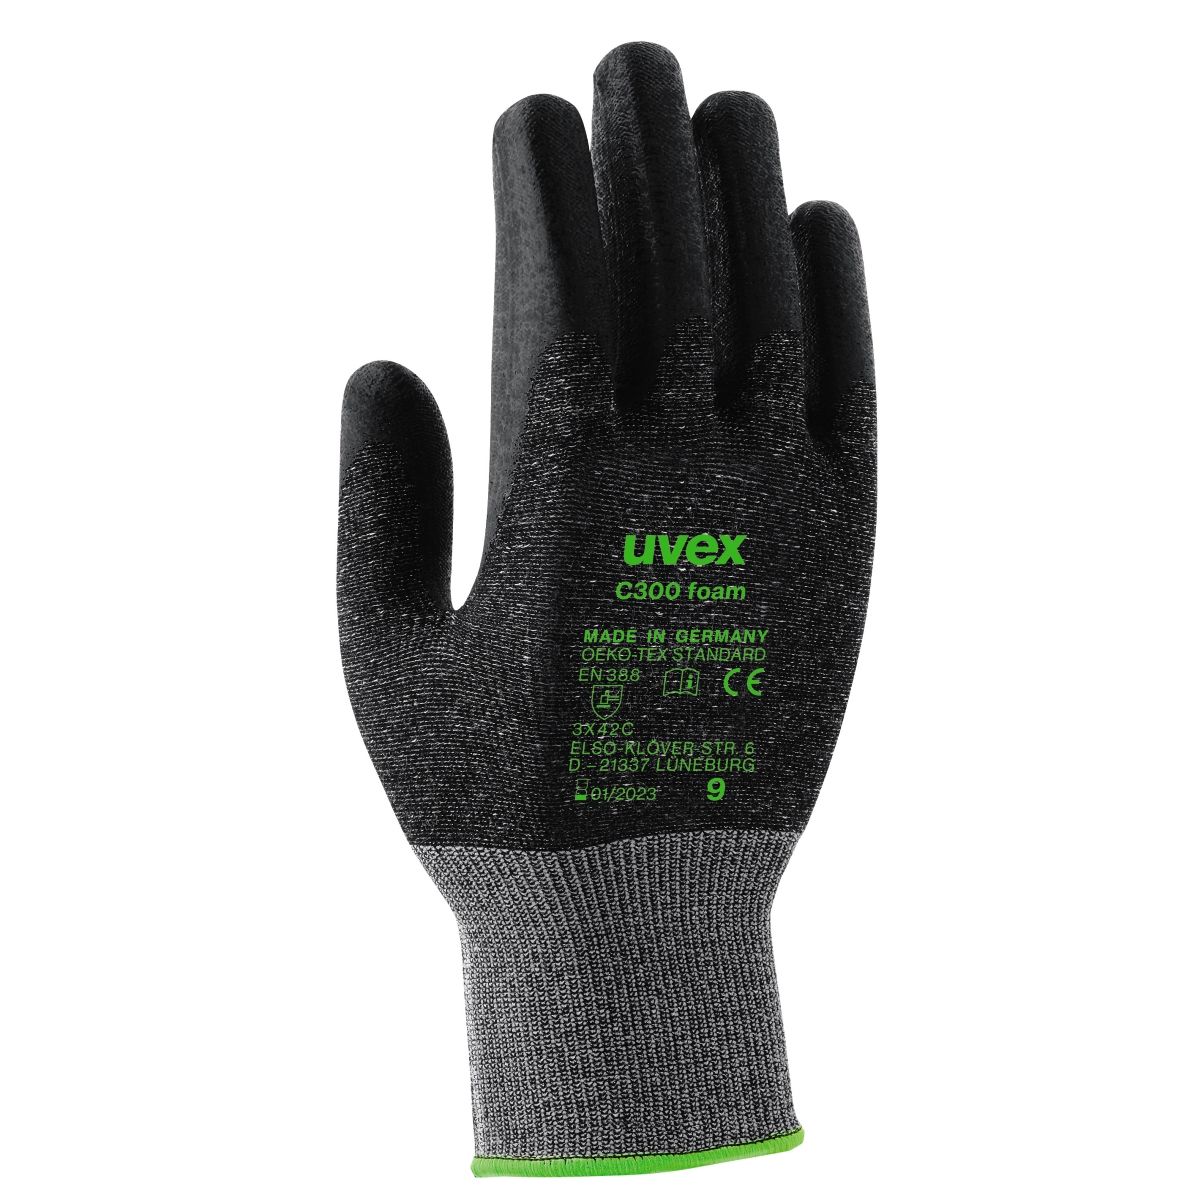 uvex C300 foam cut protection Safety Gloves - X Large (10)